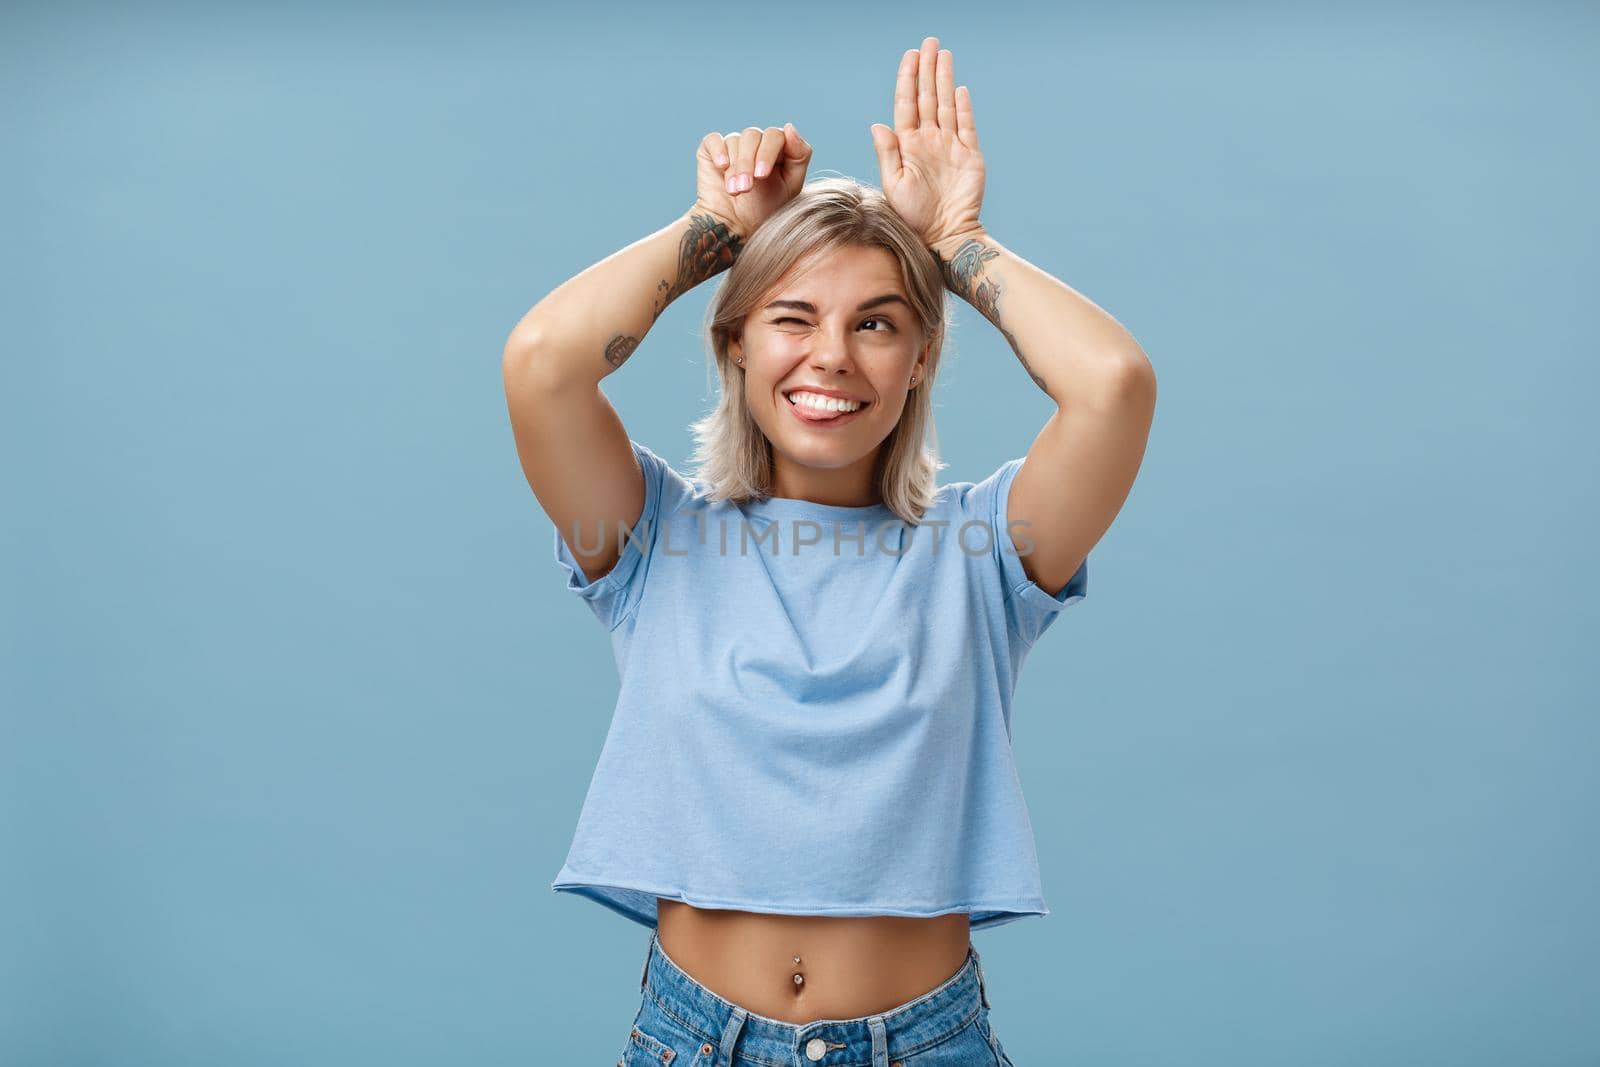 Lifestyle. Studio shot of entertained carefree and emotive happy charming woman with tattoos on arms acting like bunny with palms on head winking joyfully smiling and sticking out tongue over blue wall.